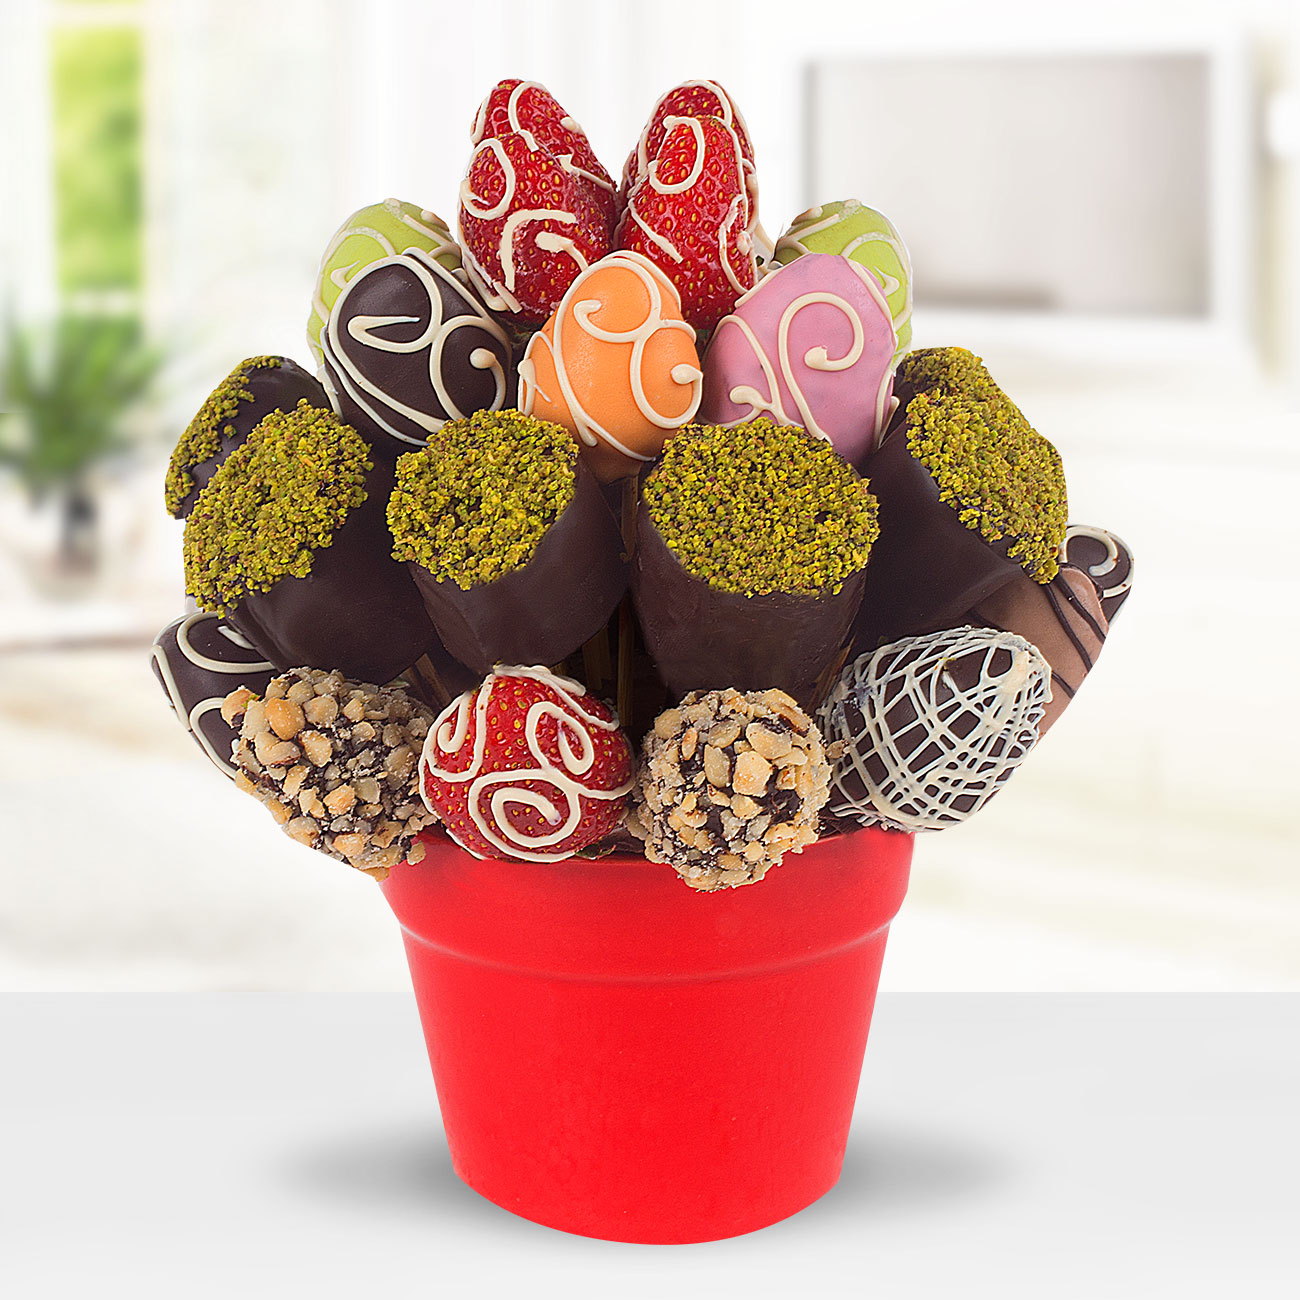 Send flowers Turkey, Chocolate Covered Strawberries from 16USD